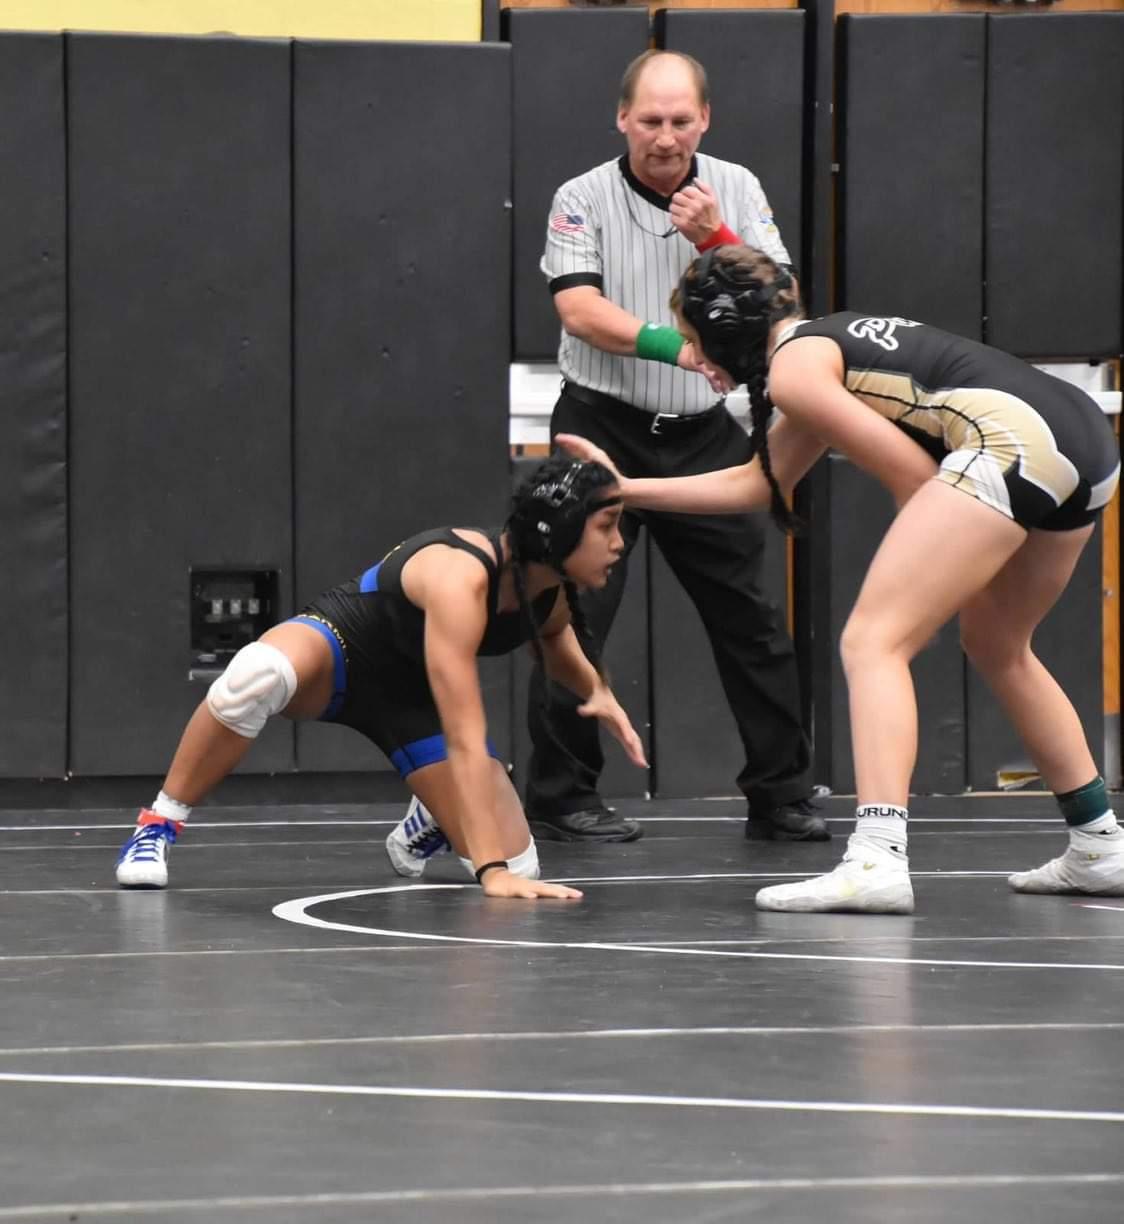 Junior Chloe de Leon wrestles against Penn on Nov. 19. De Leon said, “Everyone [on the team] is a surprise. I’ve had really low expectations for myself going into this season. I can do in practice, any moves I can learn in practice and actually execute well in a match, thats a win for me. I don’t really have to win to feel proud of myself.” Photo submitted by source.